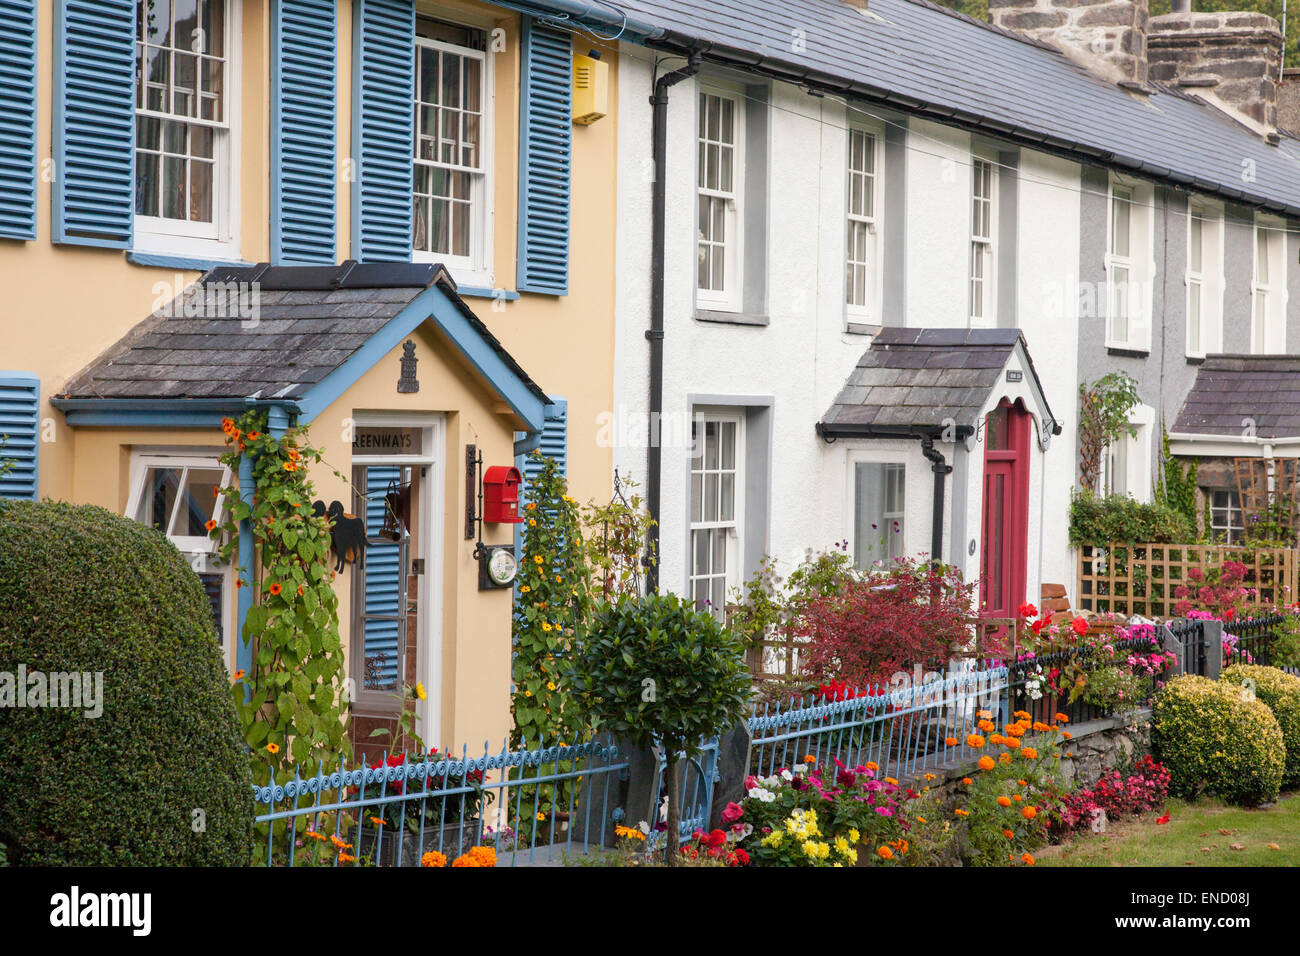 Colorful cottages in Beddgelert, Snowdonia National Park, Gwynedd, Nothh Wales, UK Stock Photo